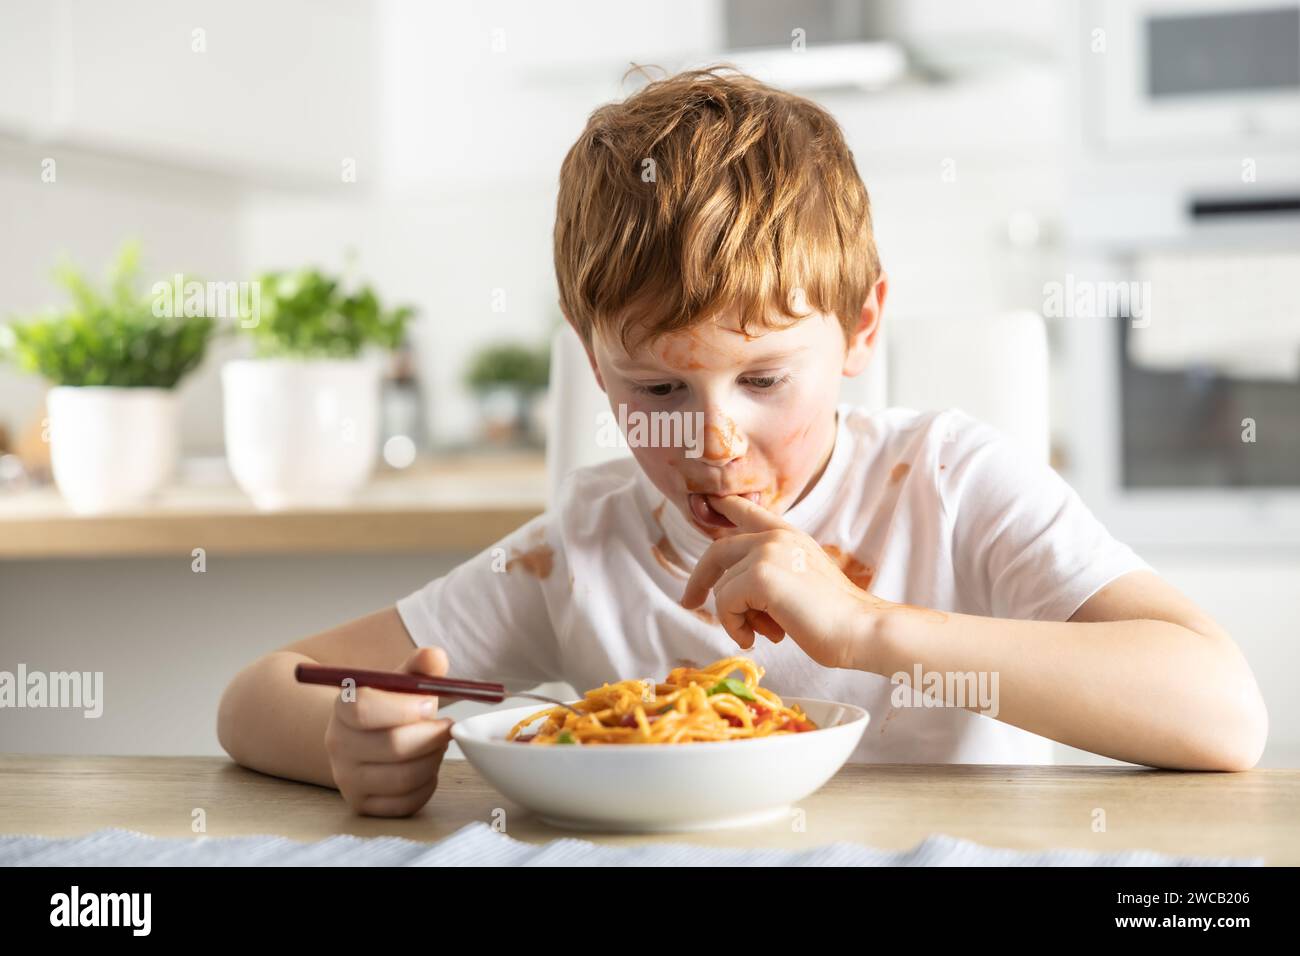 A cute little boy is eating spaghetti bolognese for lunch in the kitchen at home and is covered in ketchup and licking his fingers. Stock Photo